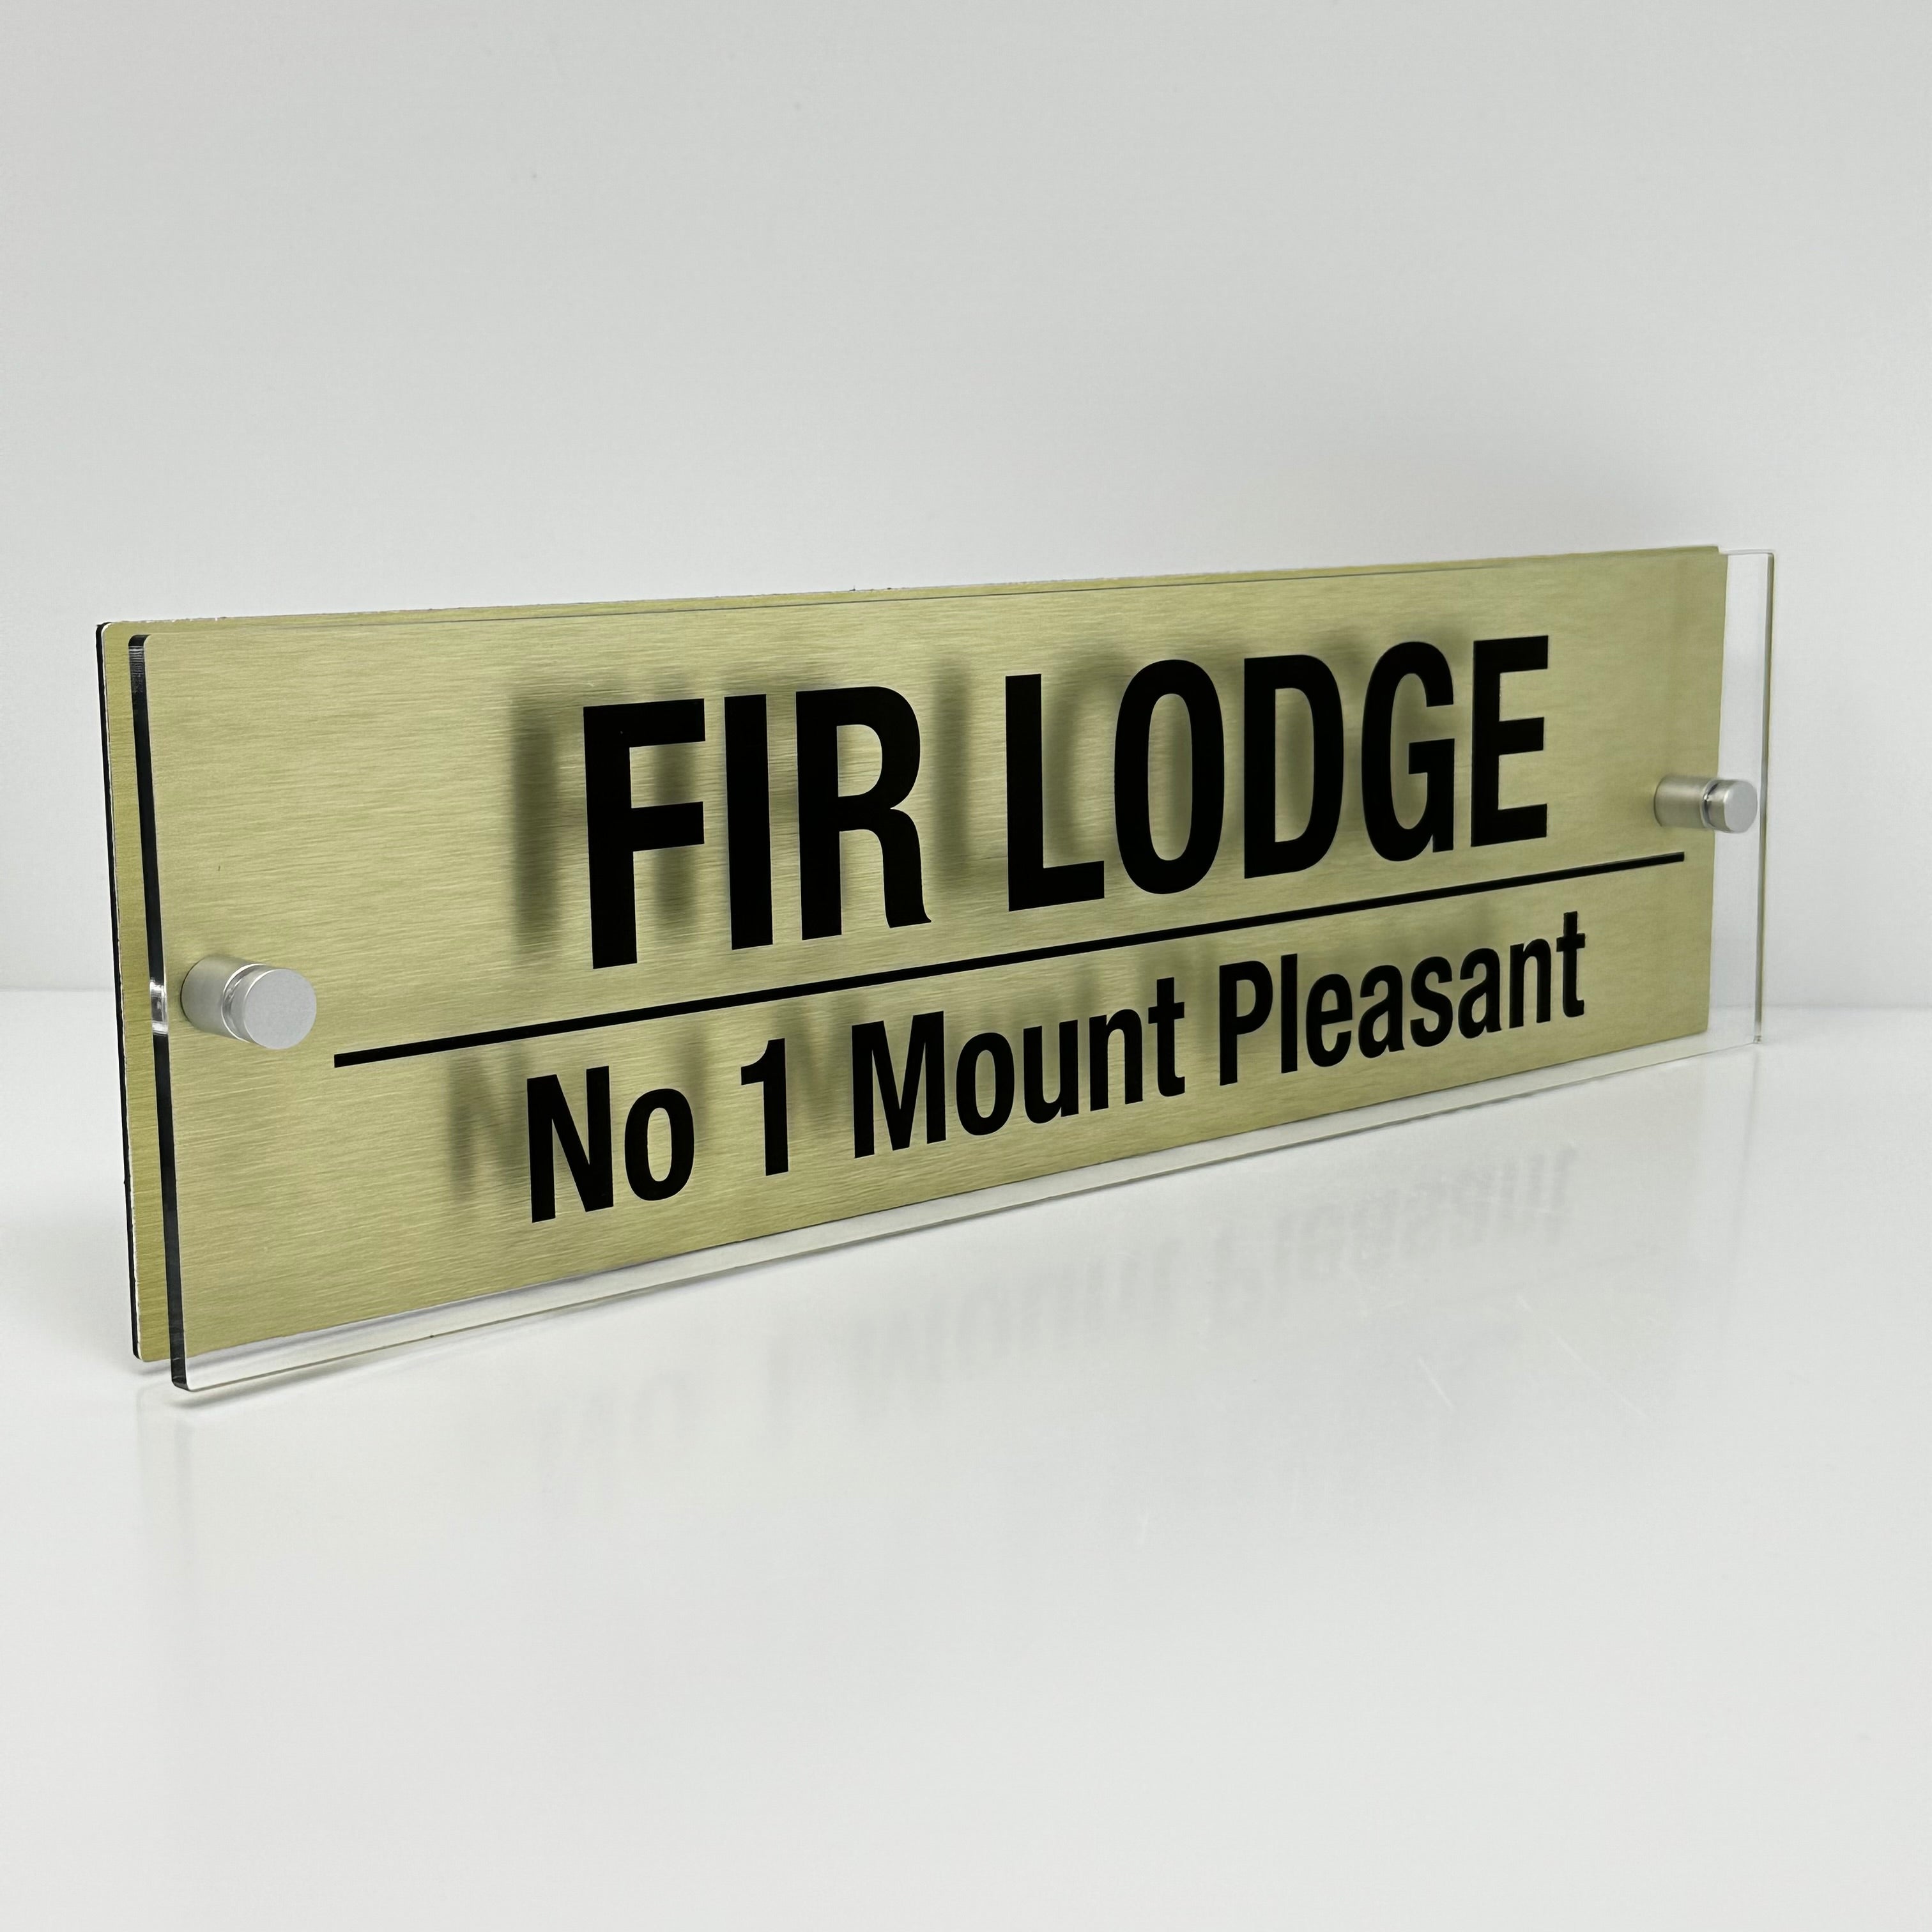 The Fir Lodge Modern House Sign with Perspex Acrylic Front, Gold Rear Panel and Satin Silver Stand Off Fixings ( Size - 42cm x 12cm )